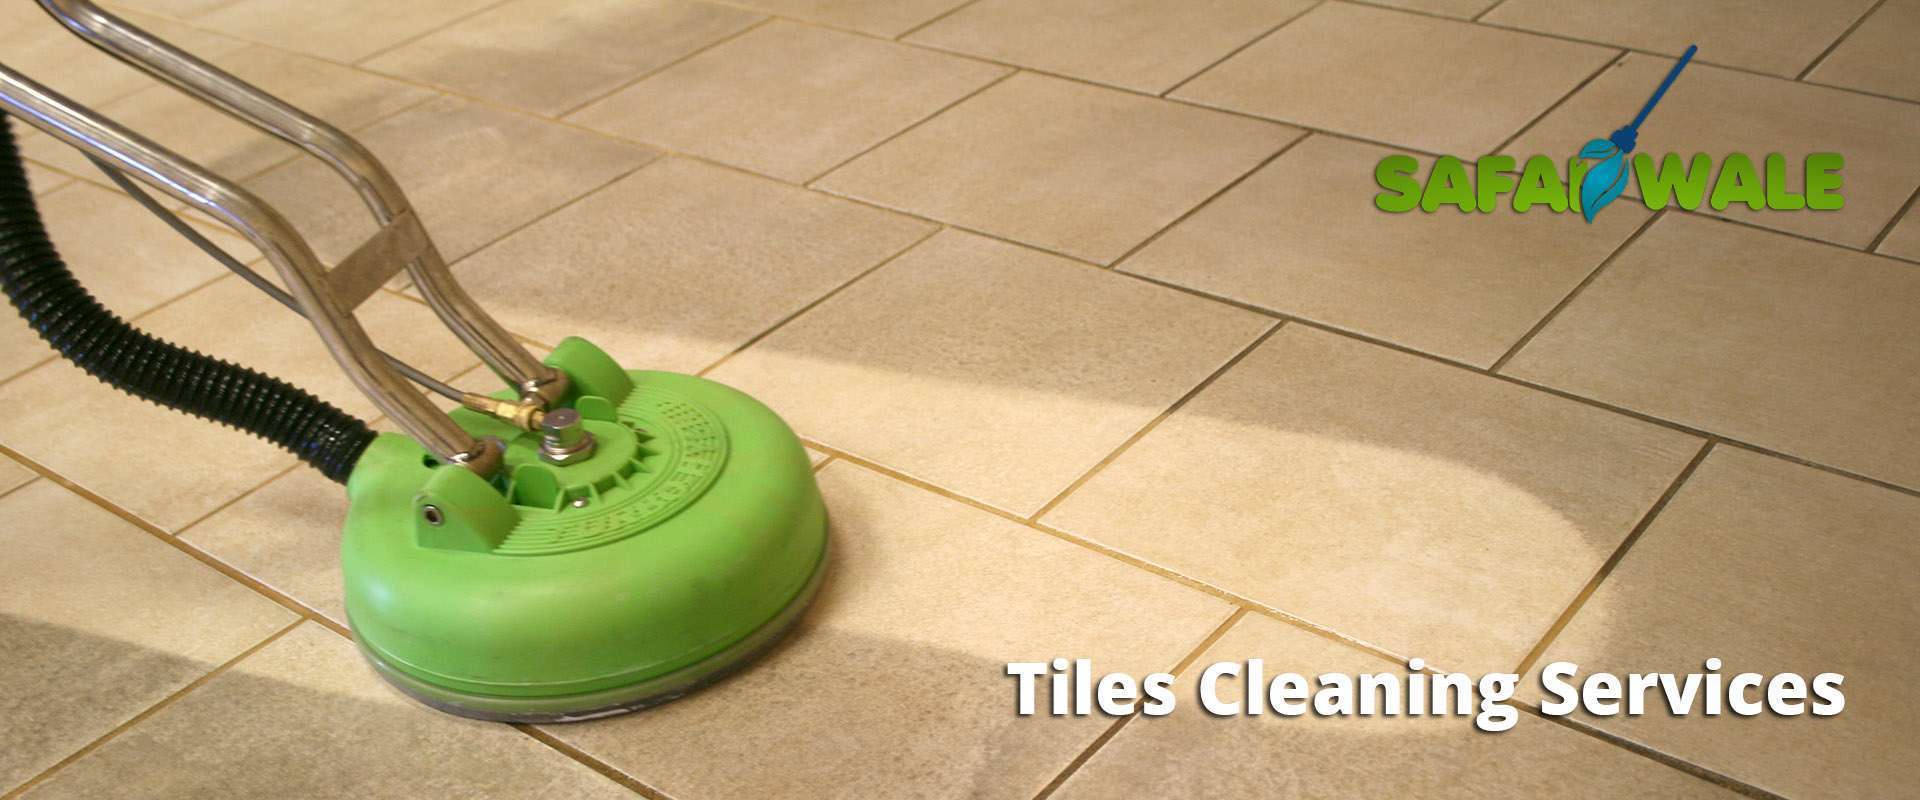 Tiles Cleaning Services In Bhopal